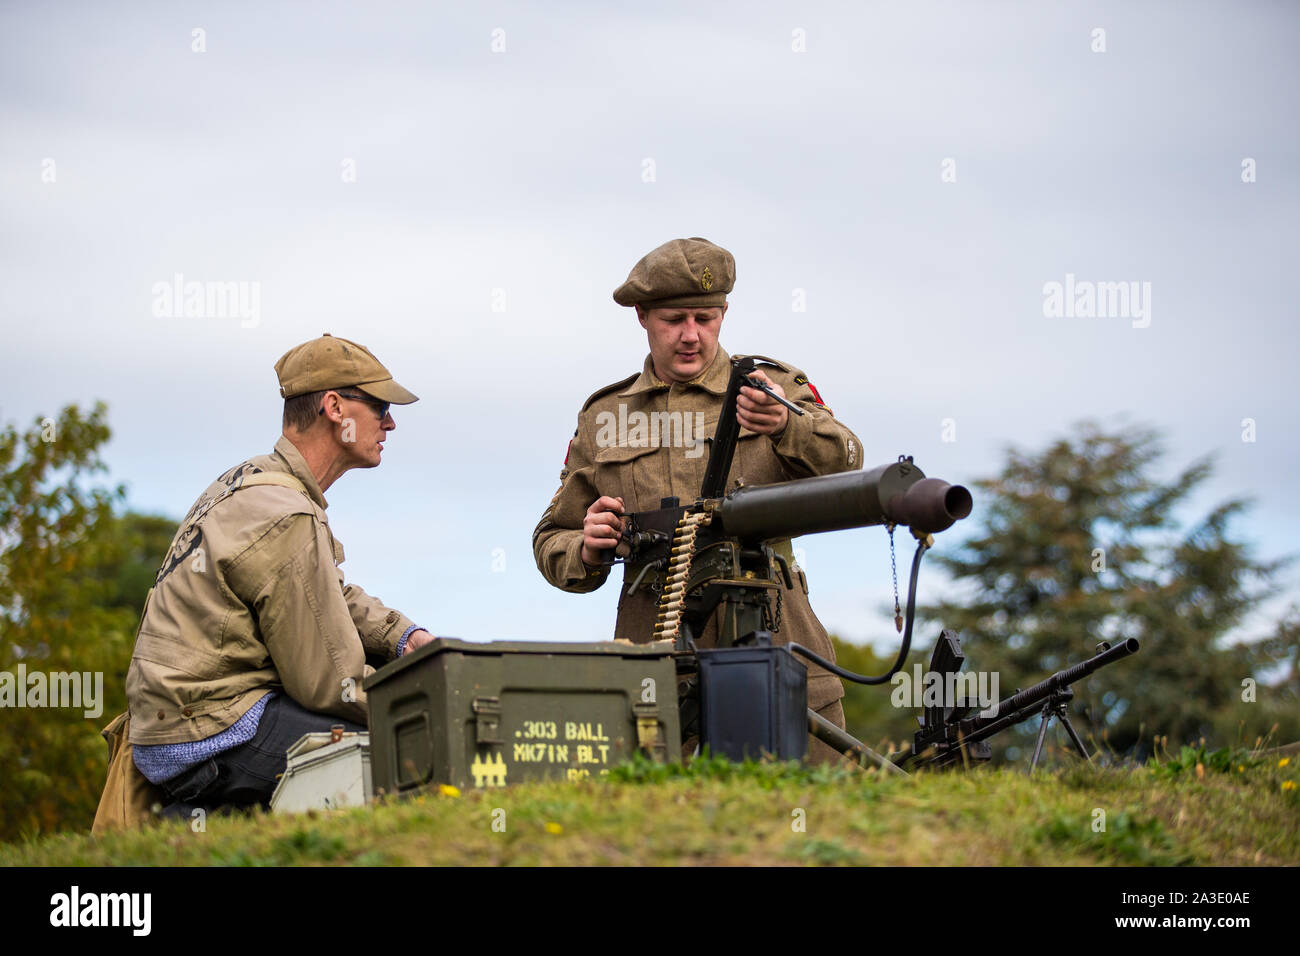 Two soldiers dressed in military uniforms with a machine gun. Hope and Glory 2019 Gravesend Fort Gardens .Credit Andrew Beck Stock Photo